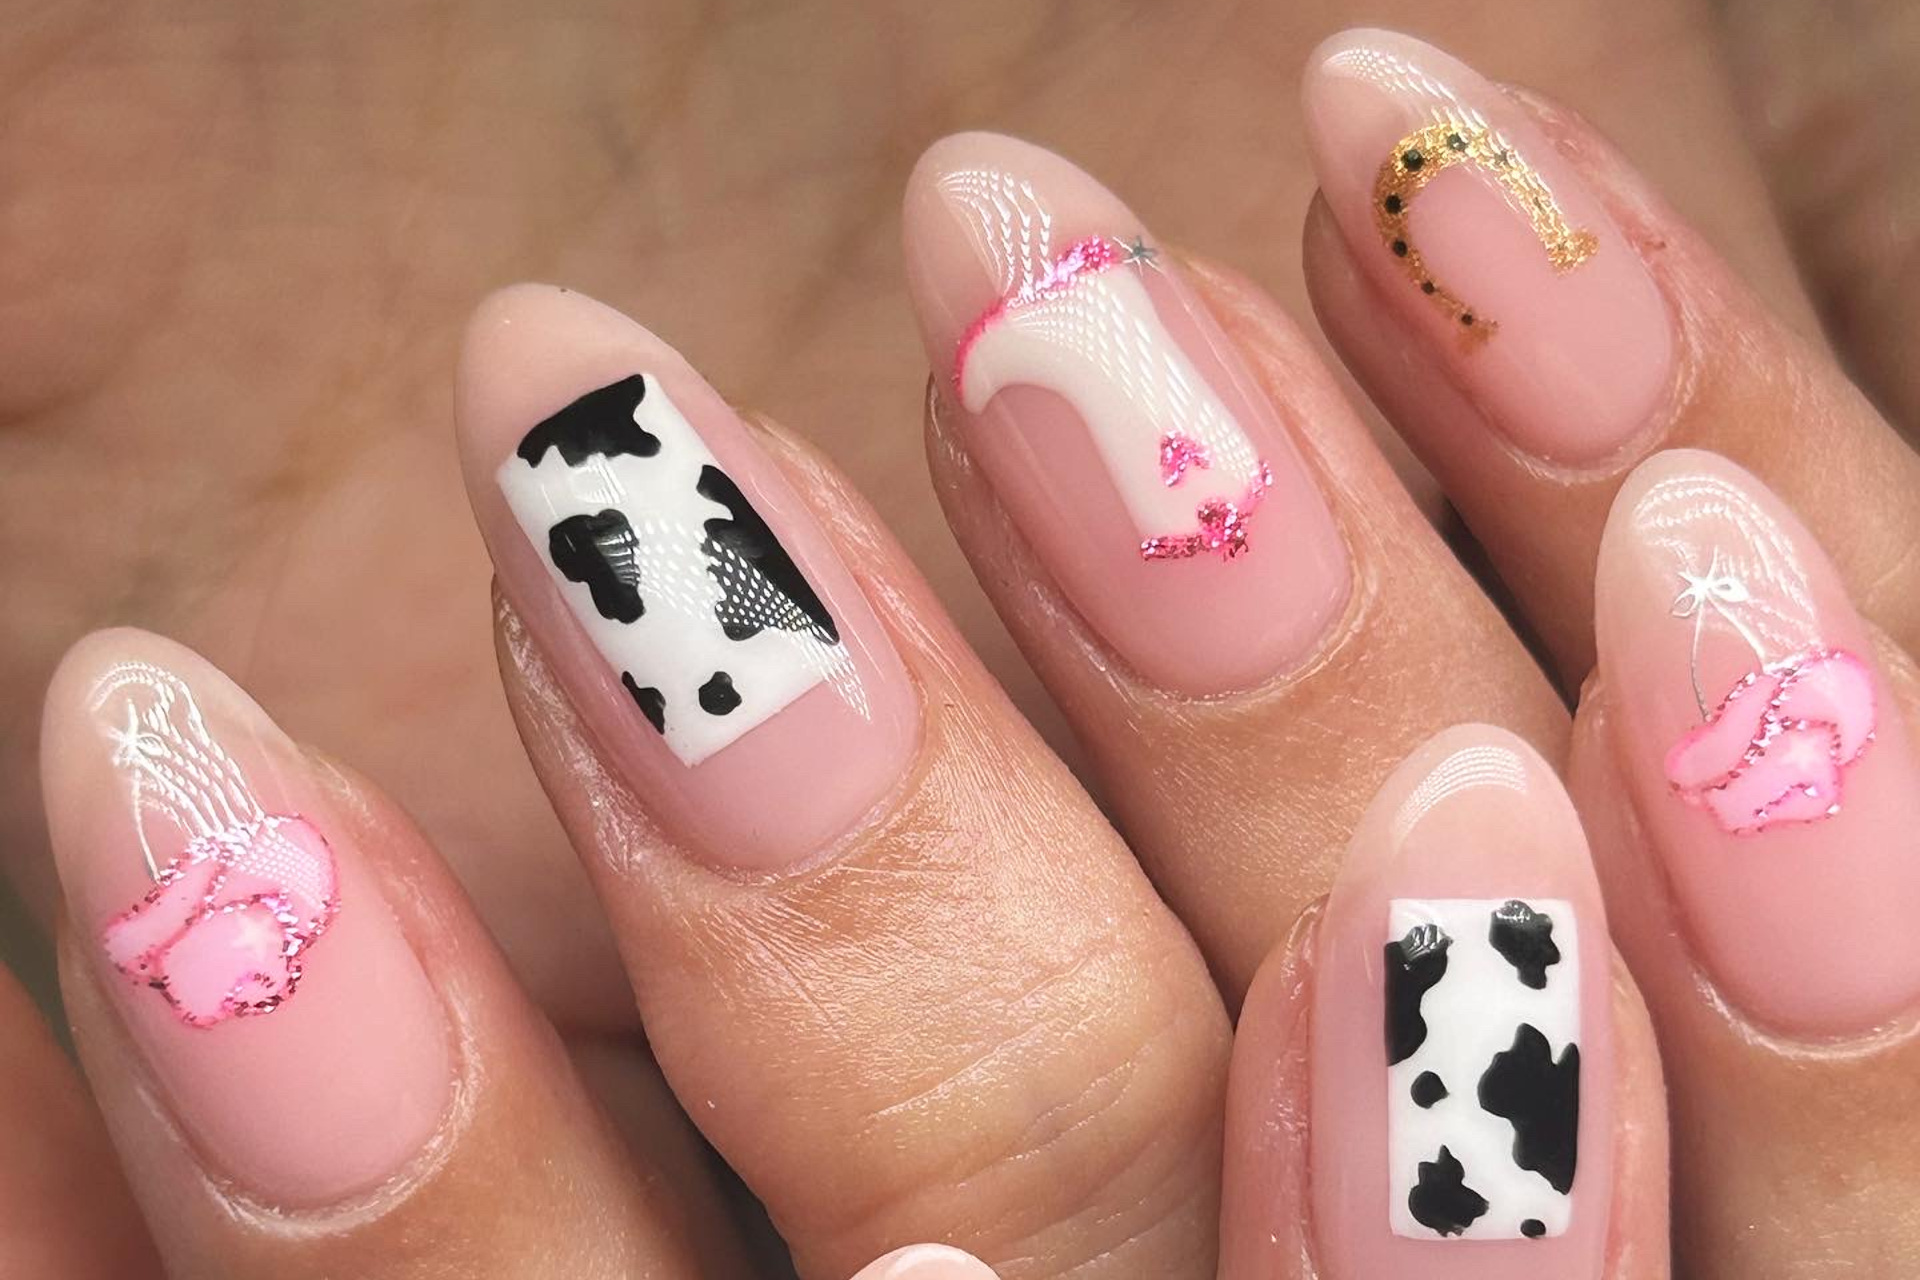 Embrace The Wild West With The Latest Beauty Trend, The Cowboy Manicure